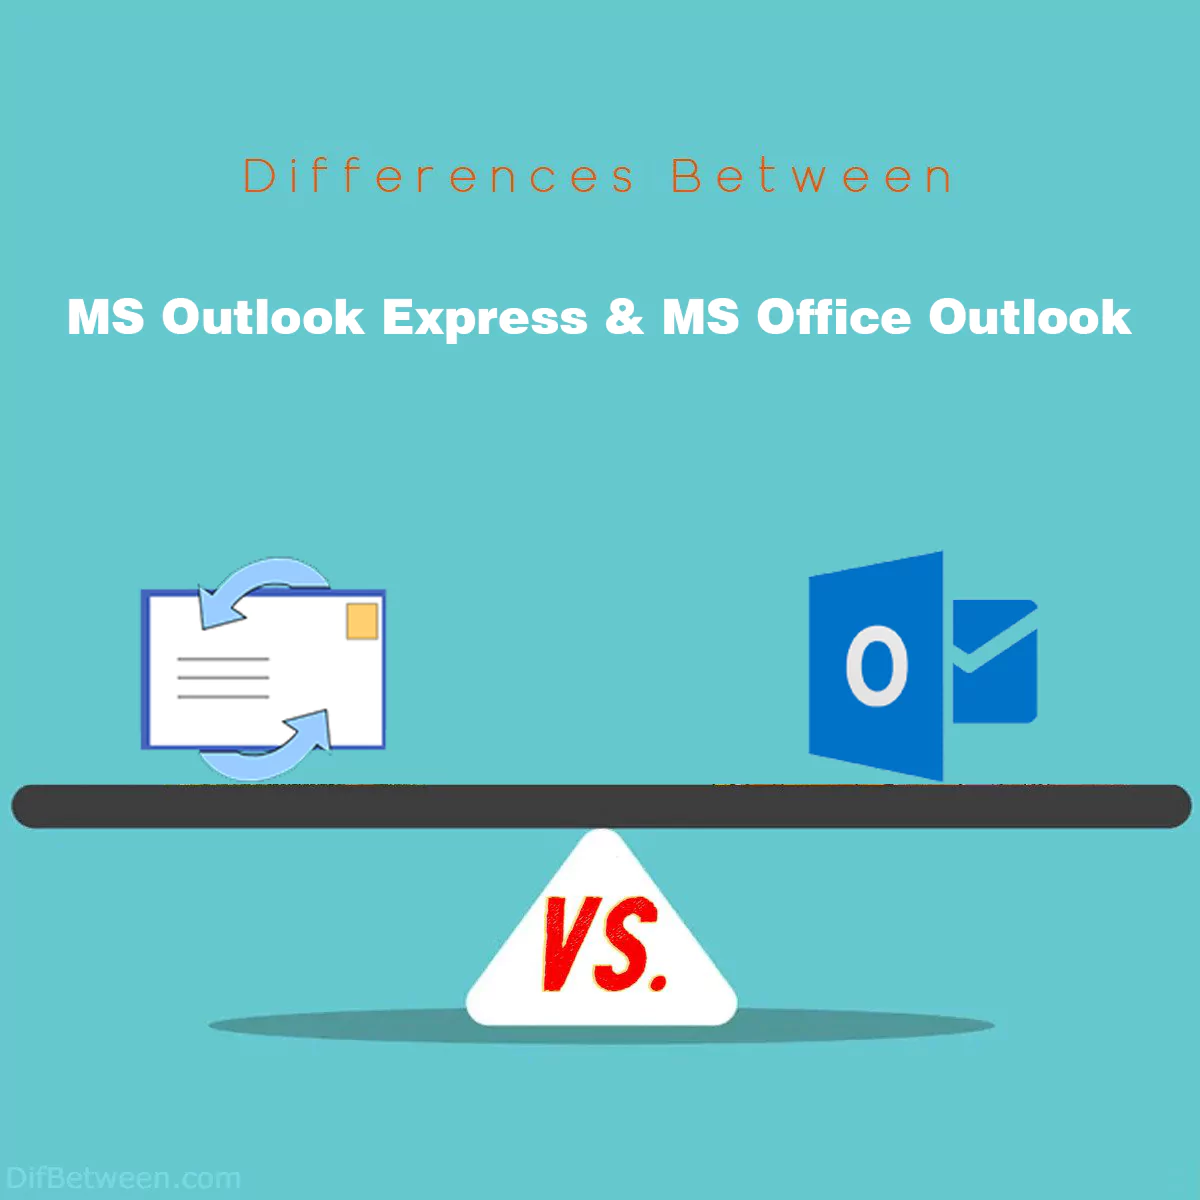 Differences Between MS Outlook Express and MS Office Outlook